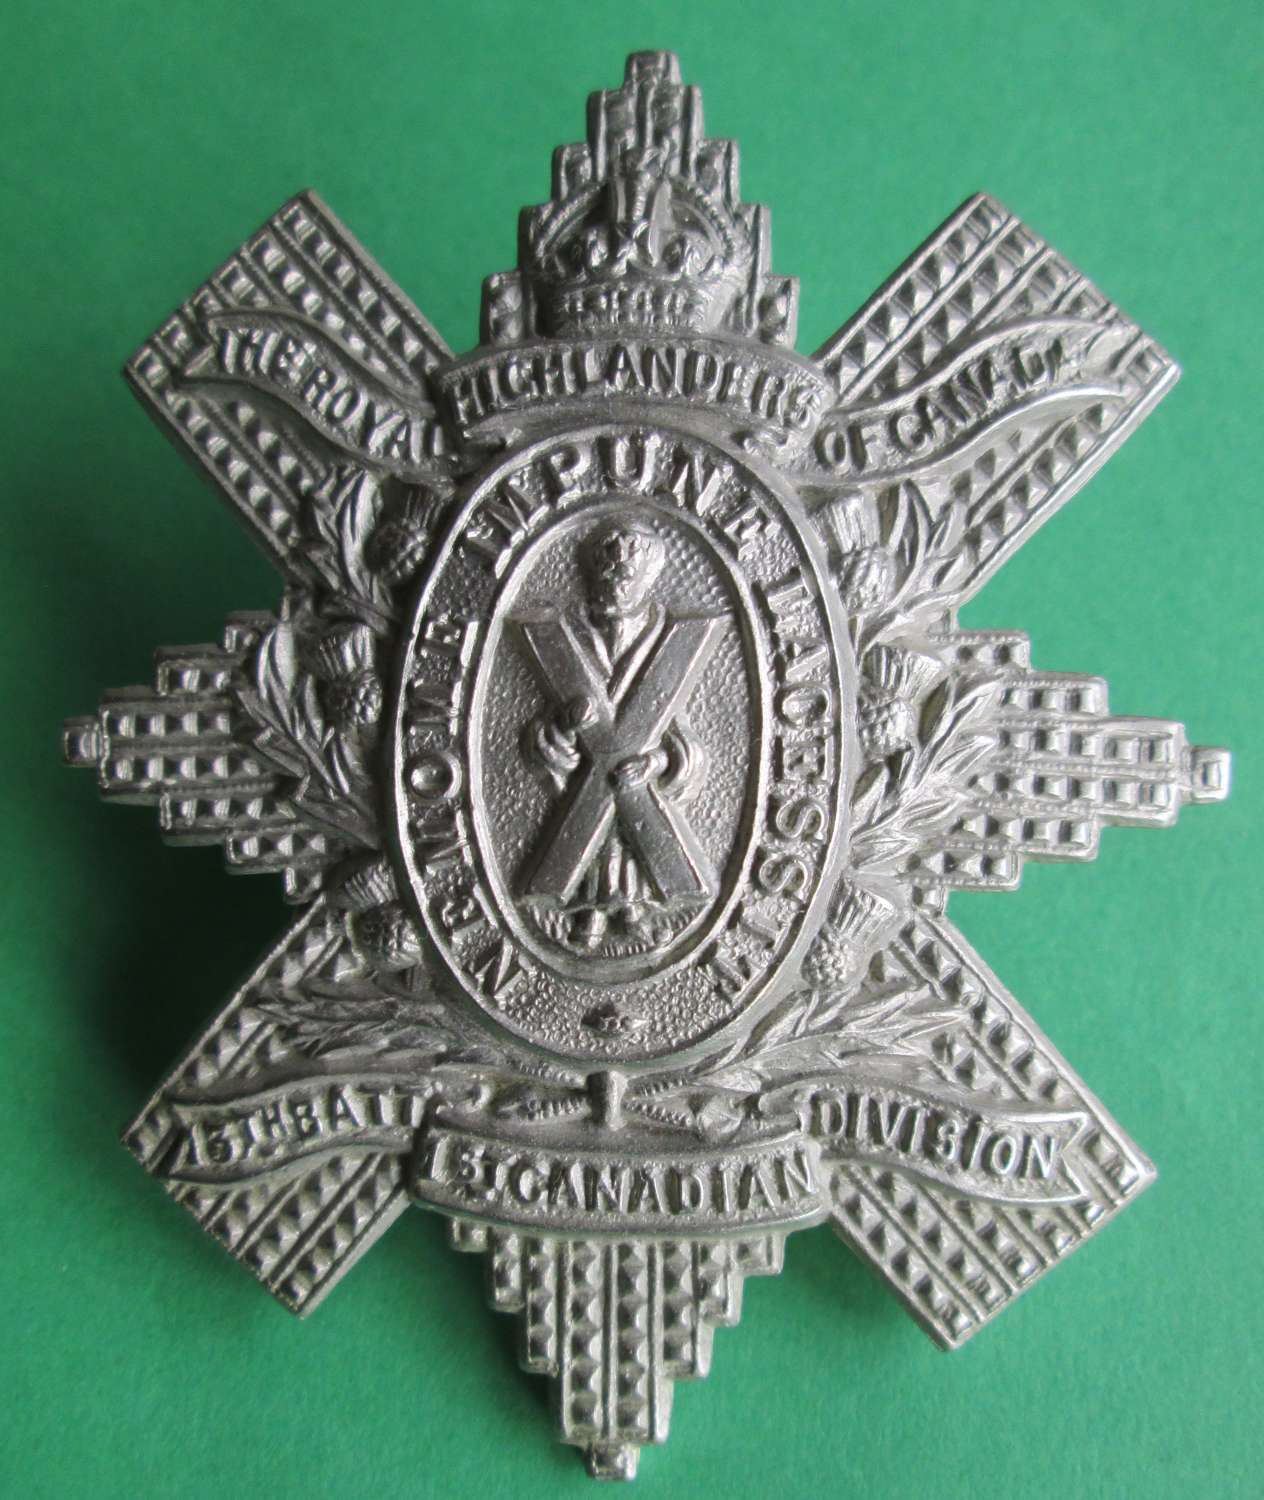 ROYAL HIGHLANDERS OF CANADA 13TH BATTALION, 1ST CANADIAN DIVISION